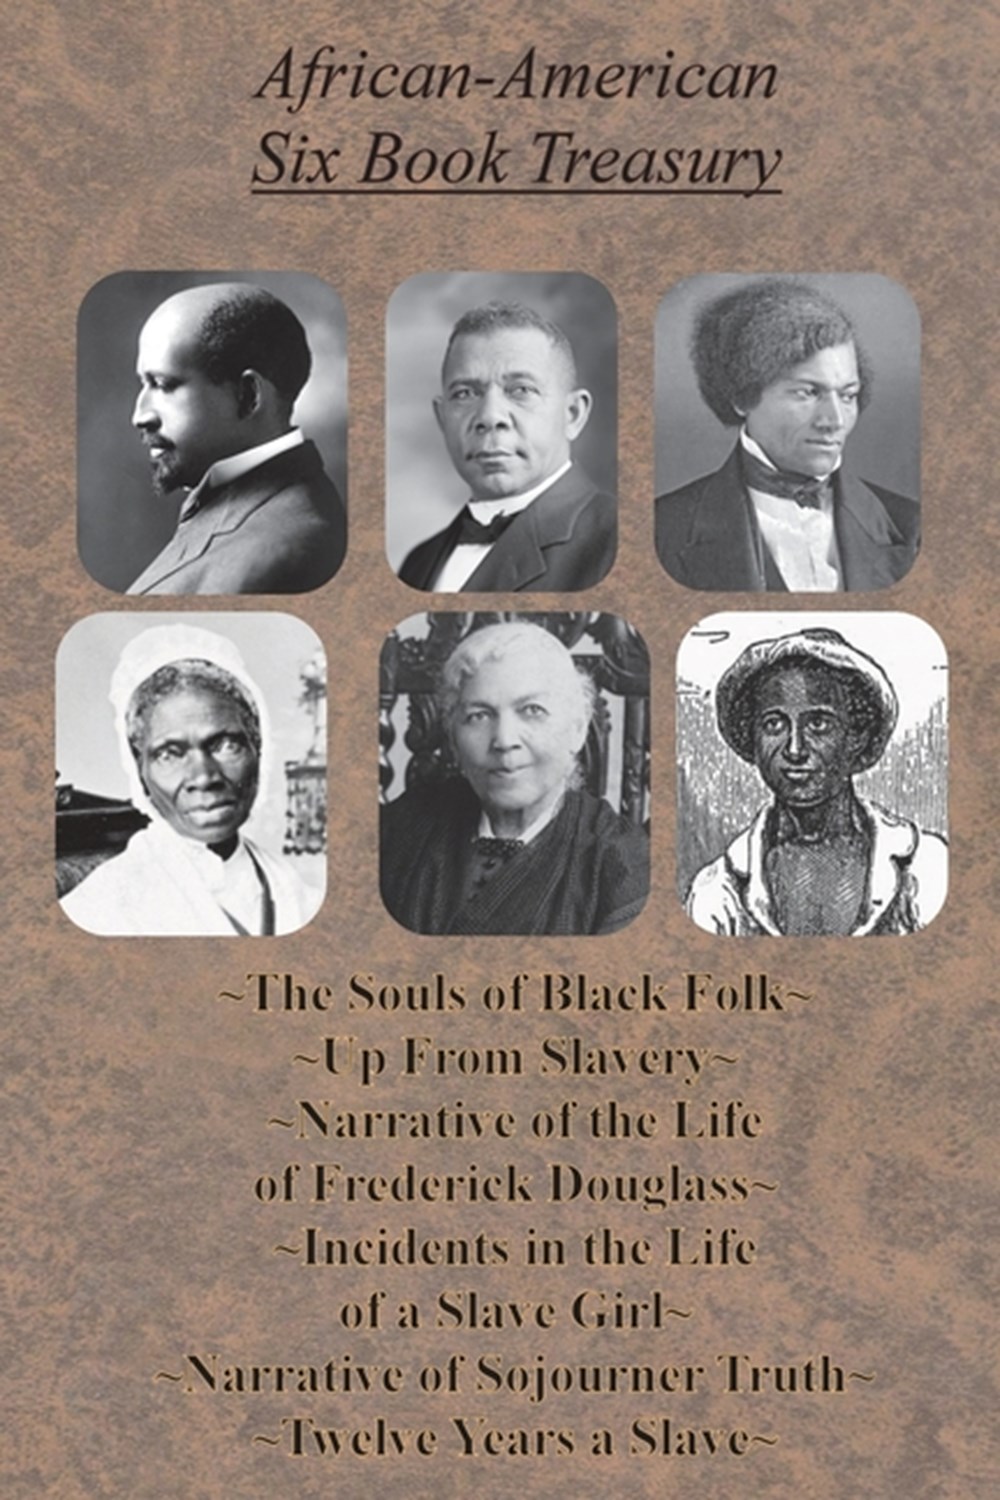 African-American Six Book Treasury - The Souls of Black Folk, Up From Slavery, Narrative of the Life